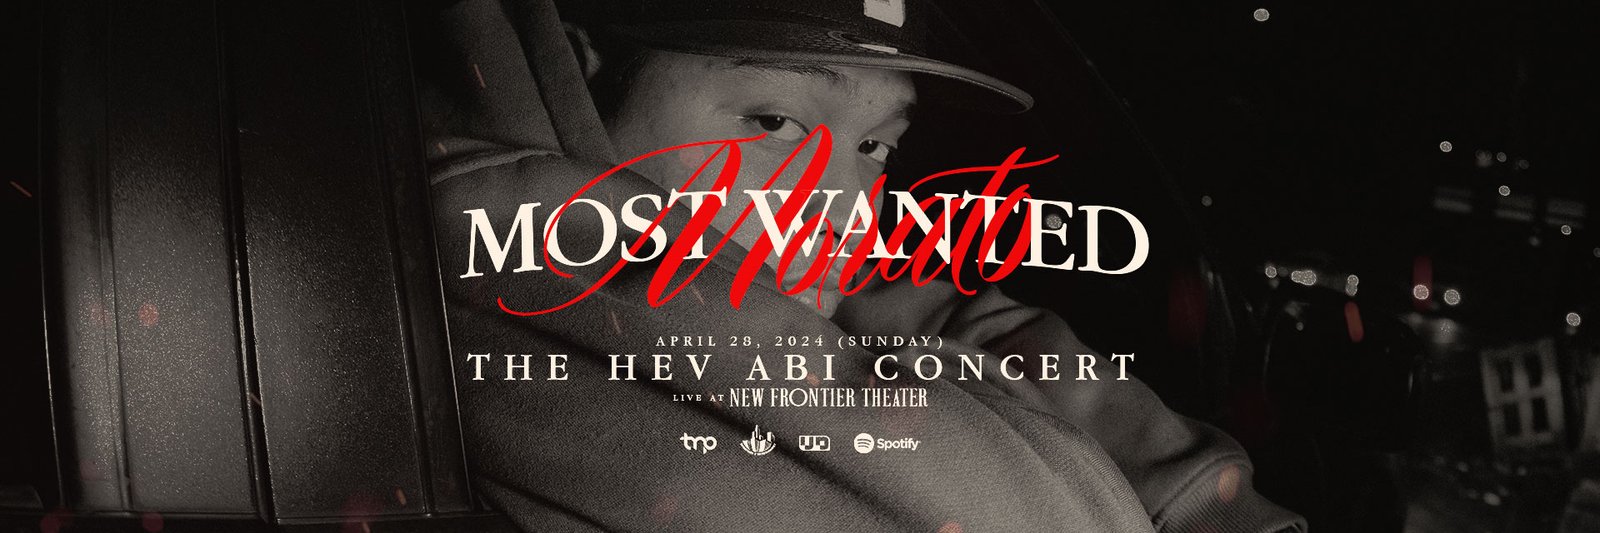 Hev Abi Brings the Heat with “MORATO MOST WANTED” Concert! Hev Abi Ignites Cubao with “MORATO MOST WANTED” Concert! (April 28, 2024)